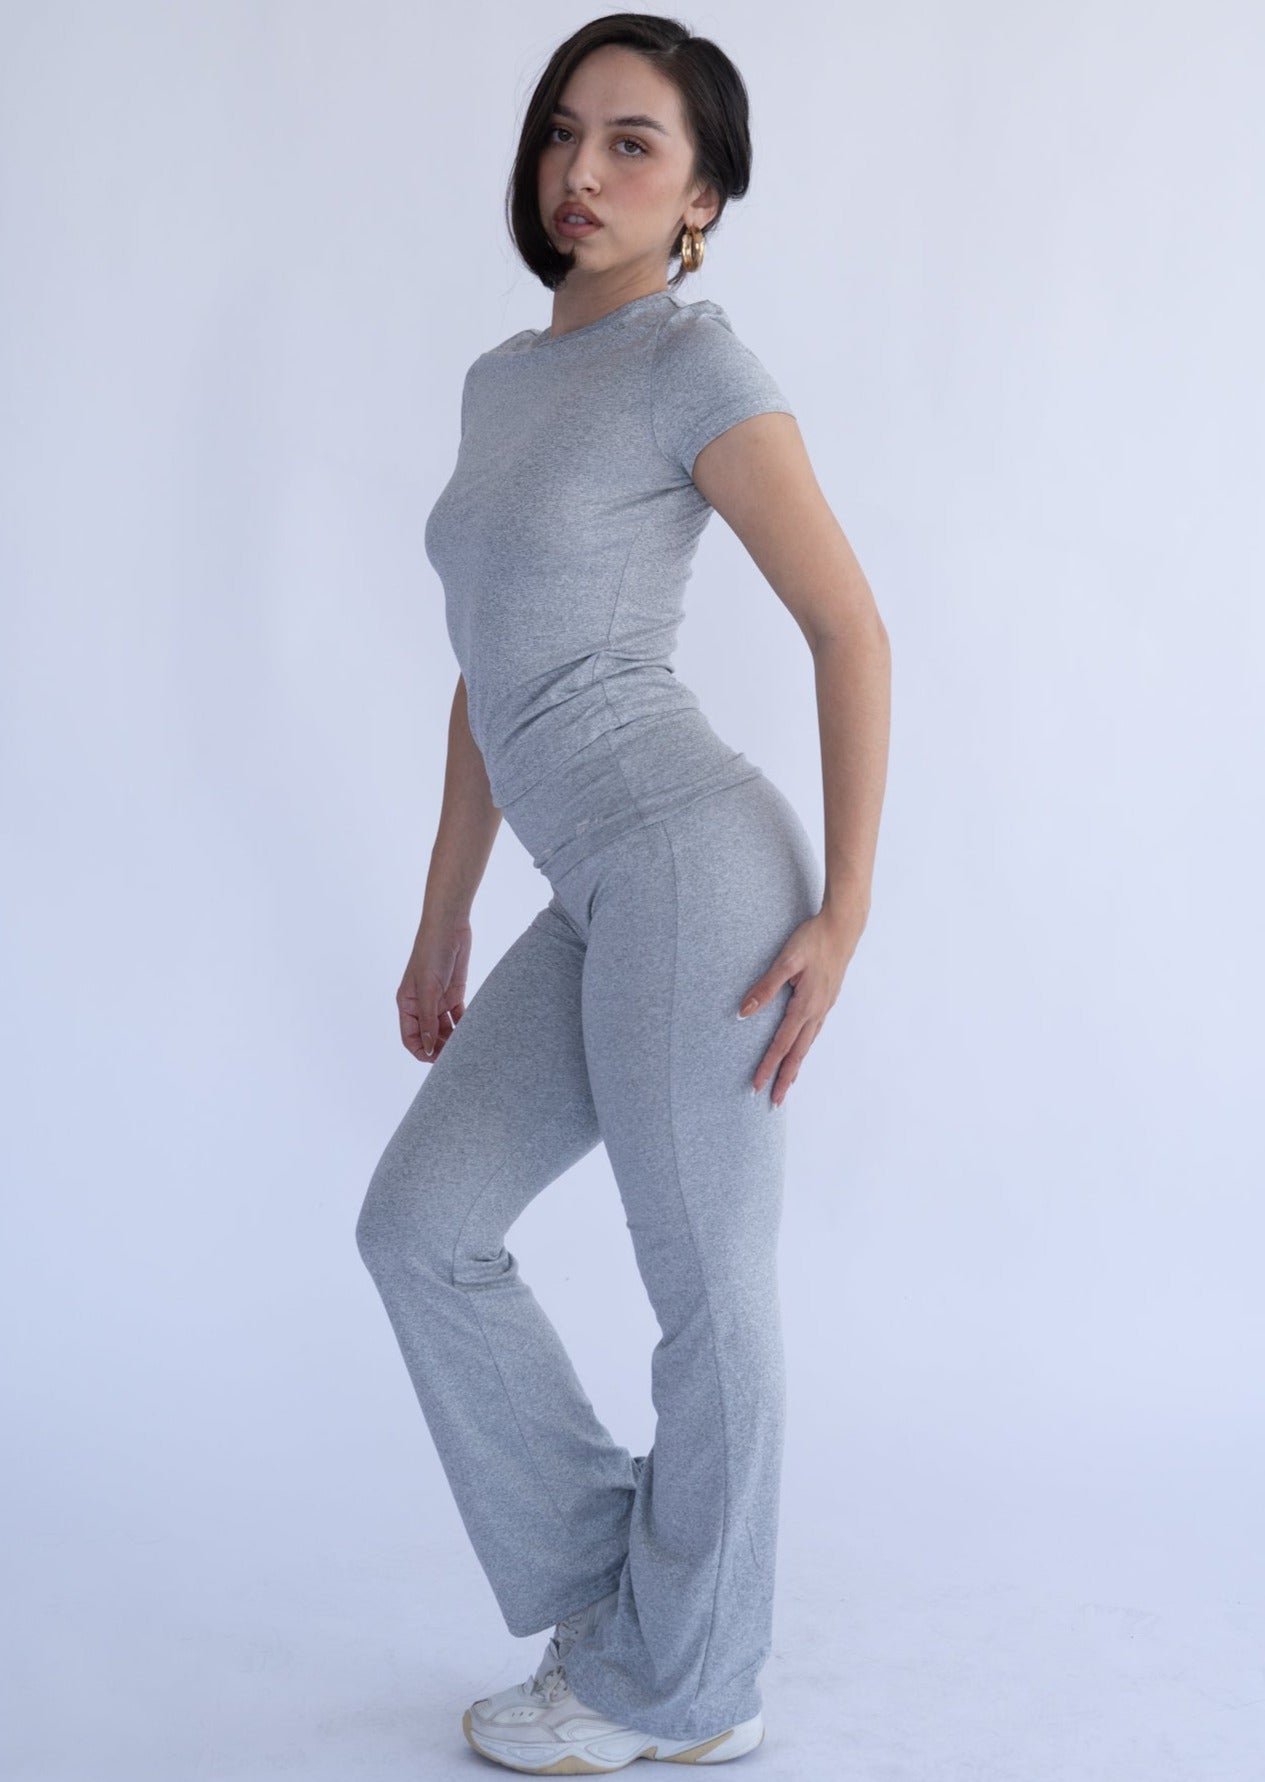 Fold Over Yoga Pants in Grey